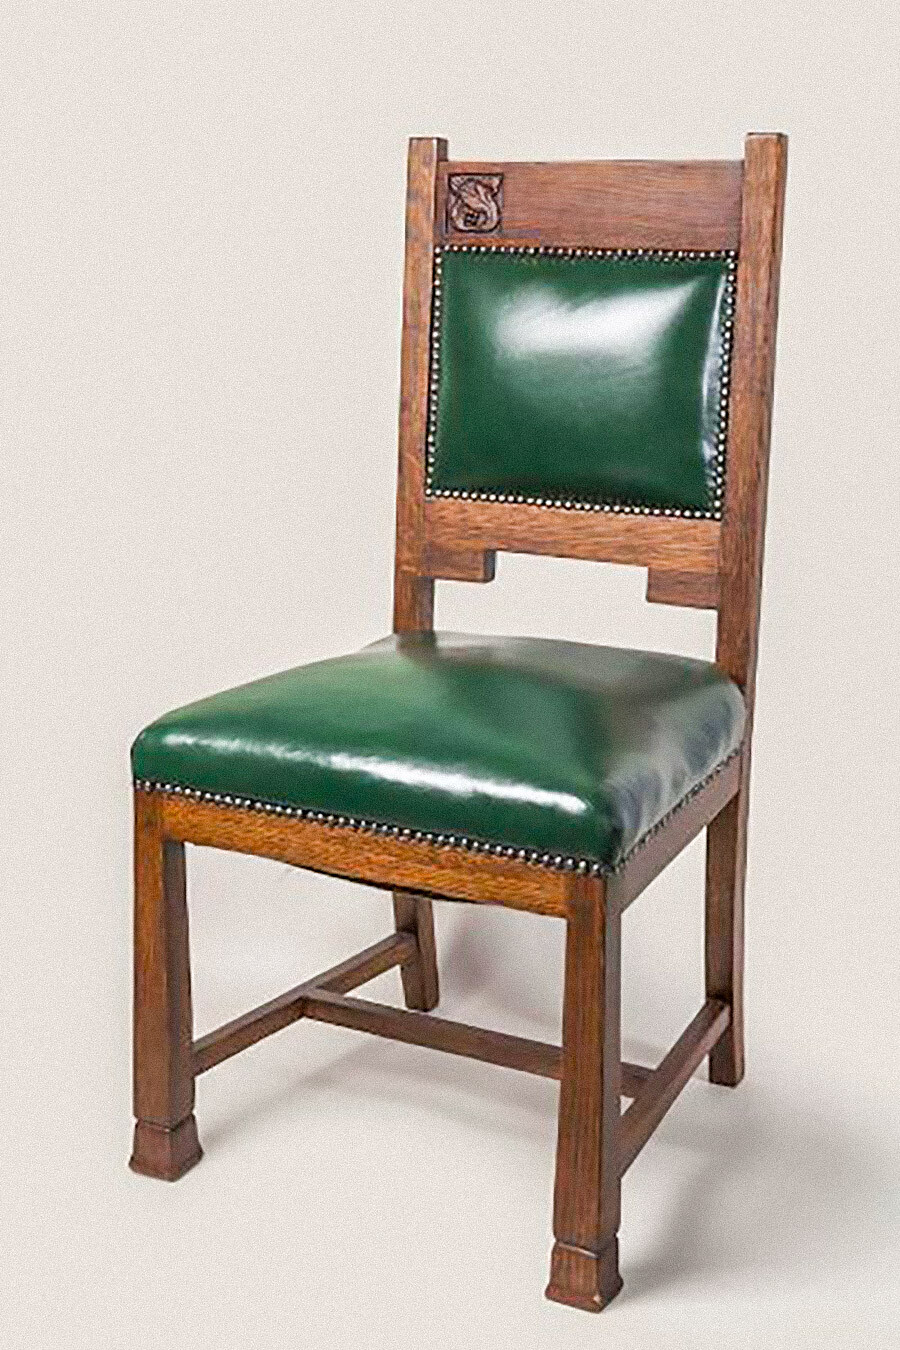 A chair produced at the 'Muir & Mirrielees' furniture factory. Early 20th century